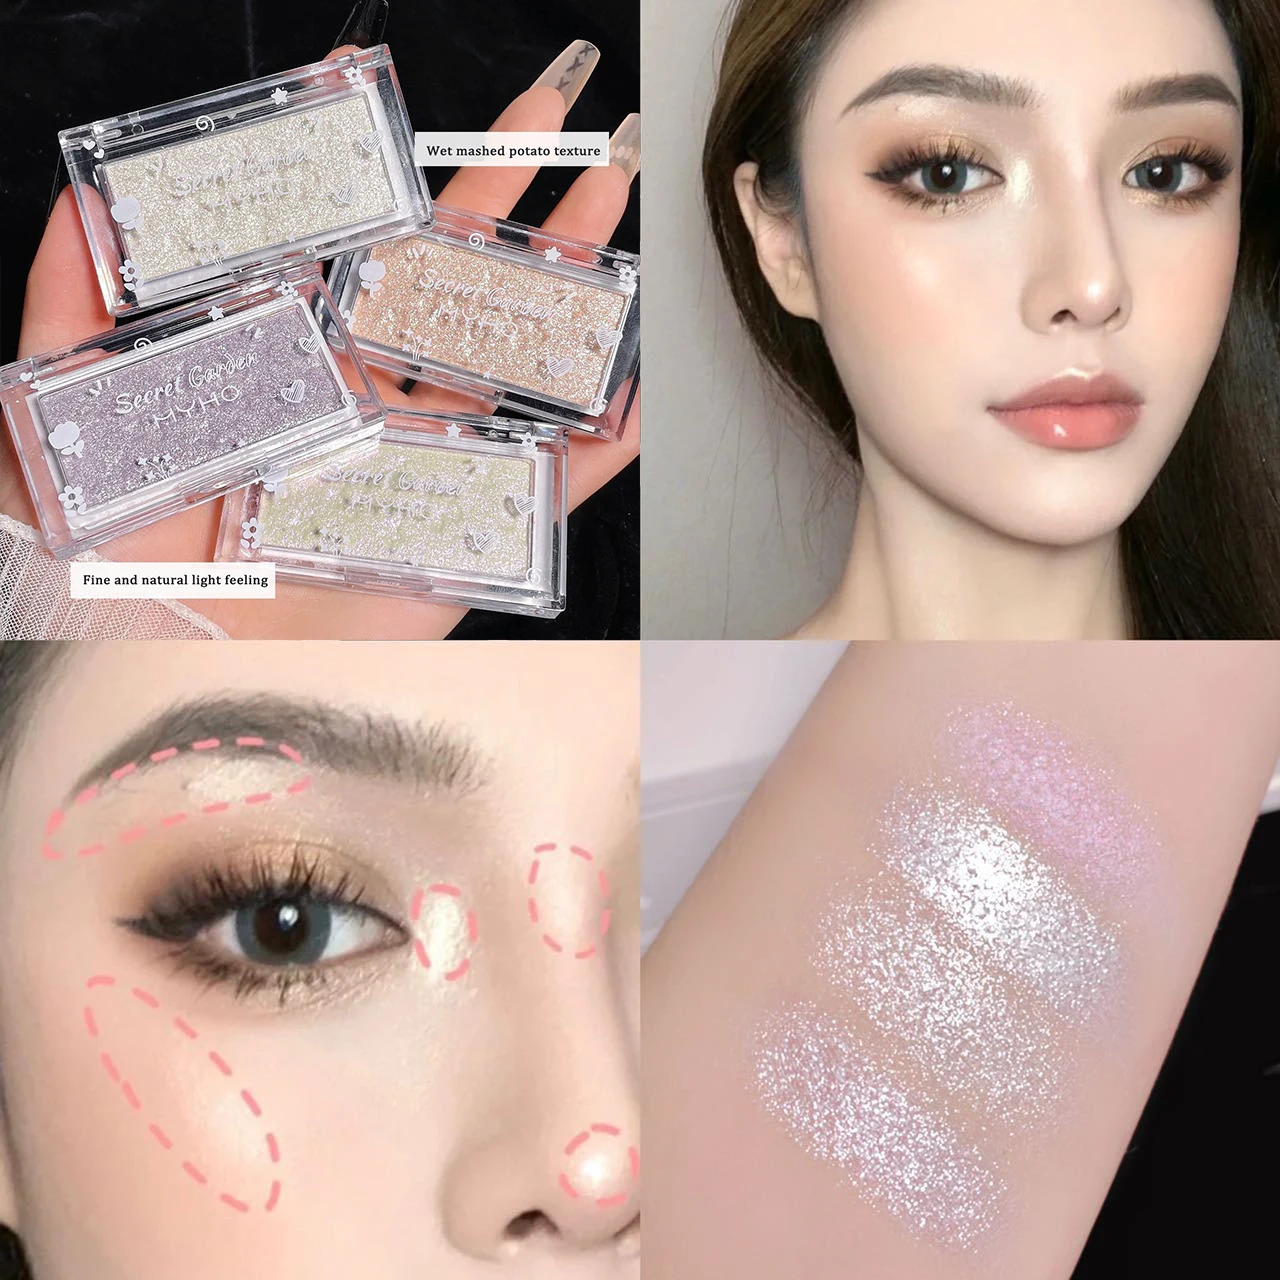 Three Scouts Silver White High Gloss Face Brightening Makeup Diamond Highlighter Palette Mashed Potato Texture Shimmer Iluminado